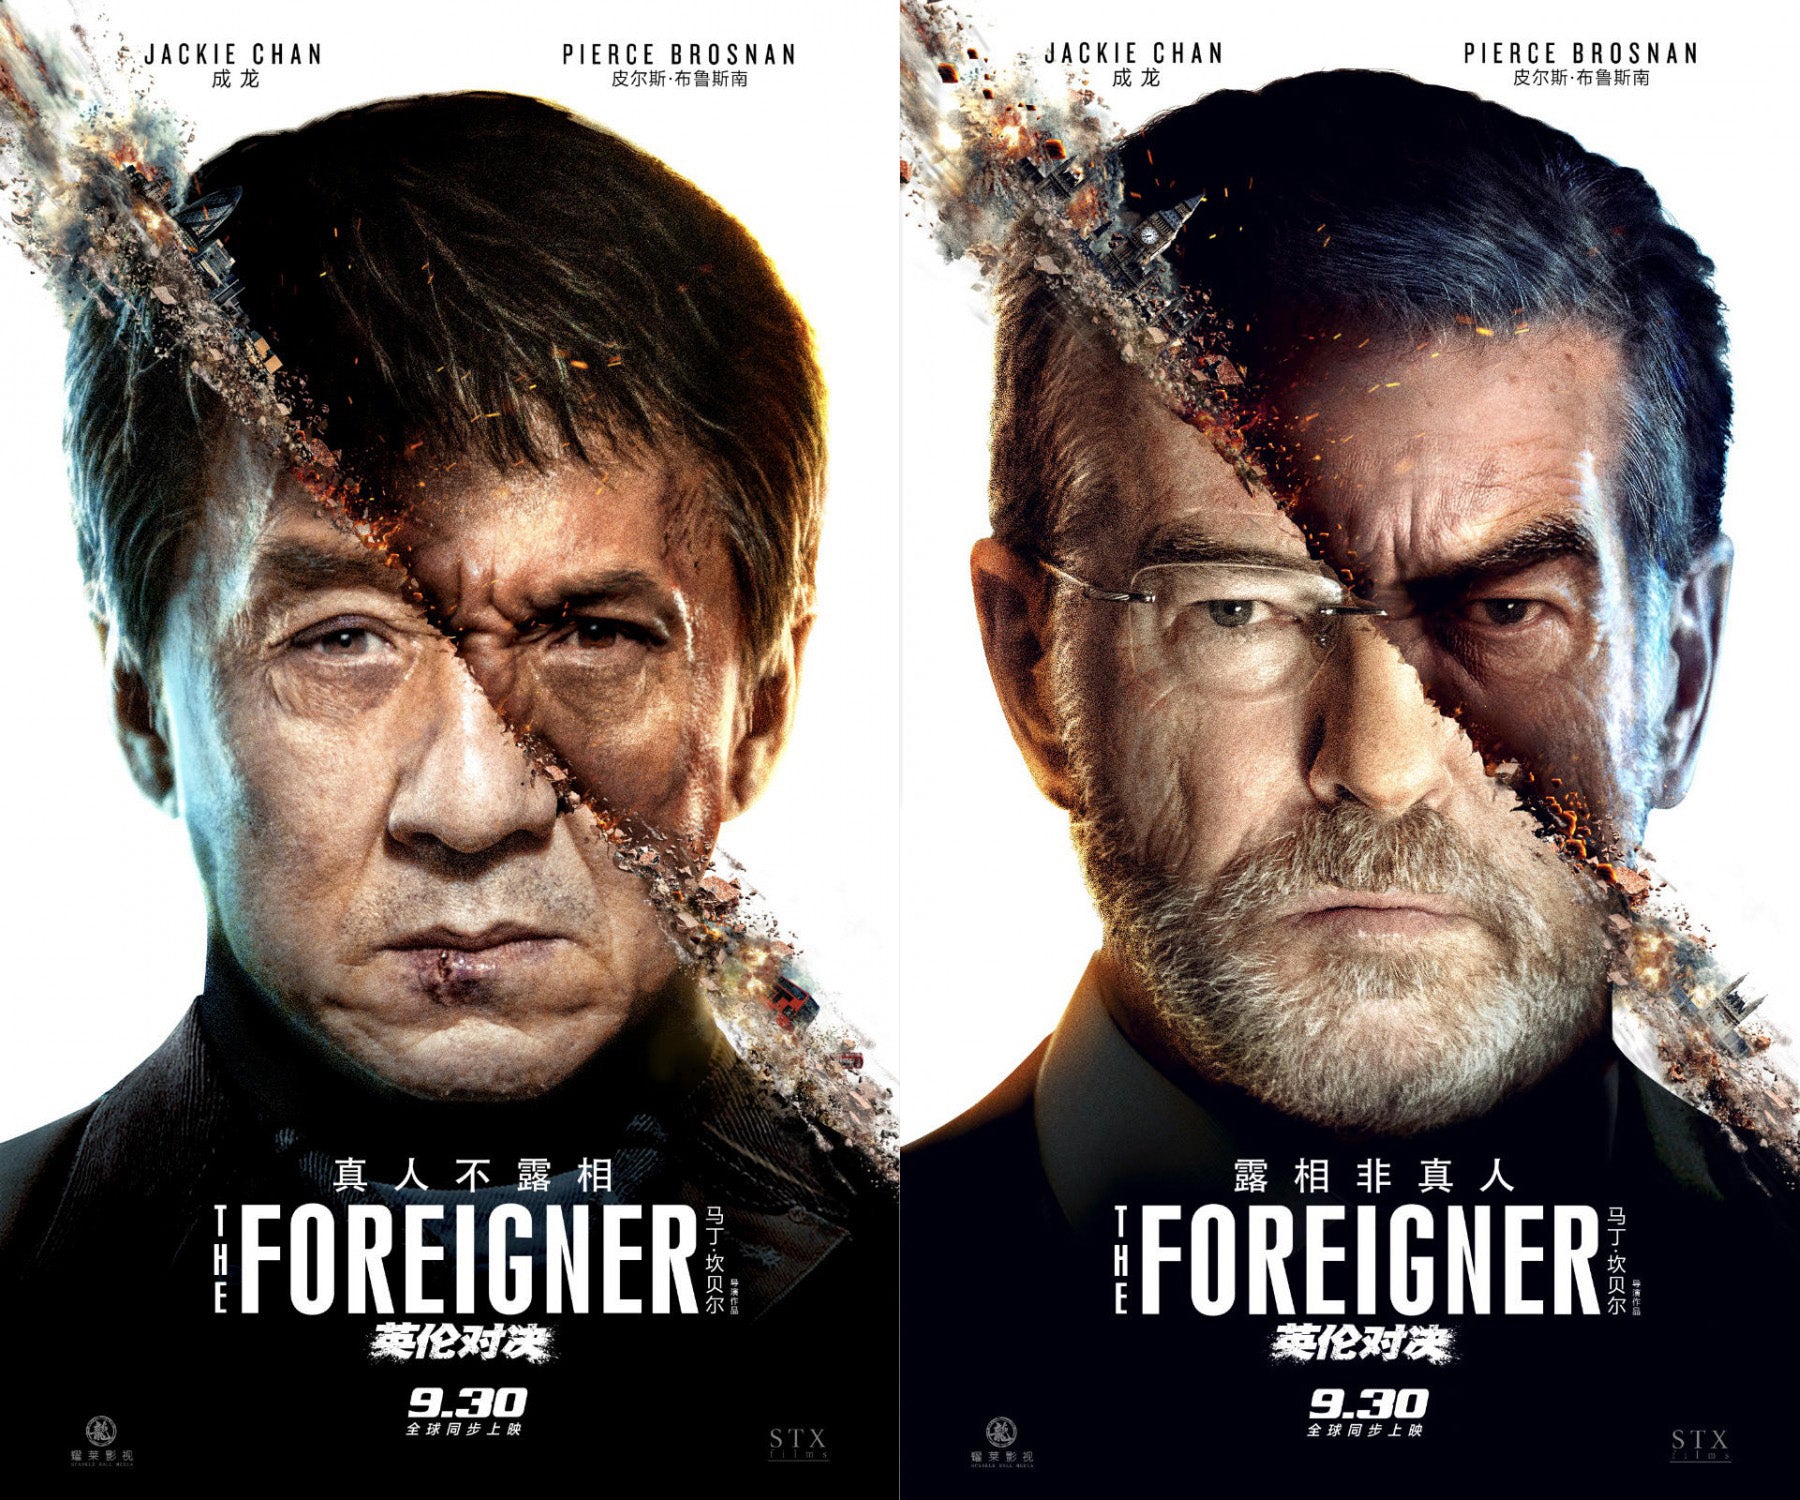 Jackie Chan's "The Foreigner" Miami Screening - Oct. 12th